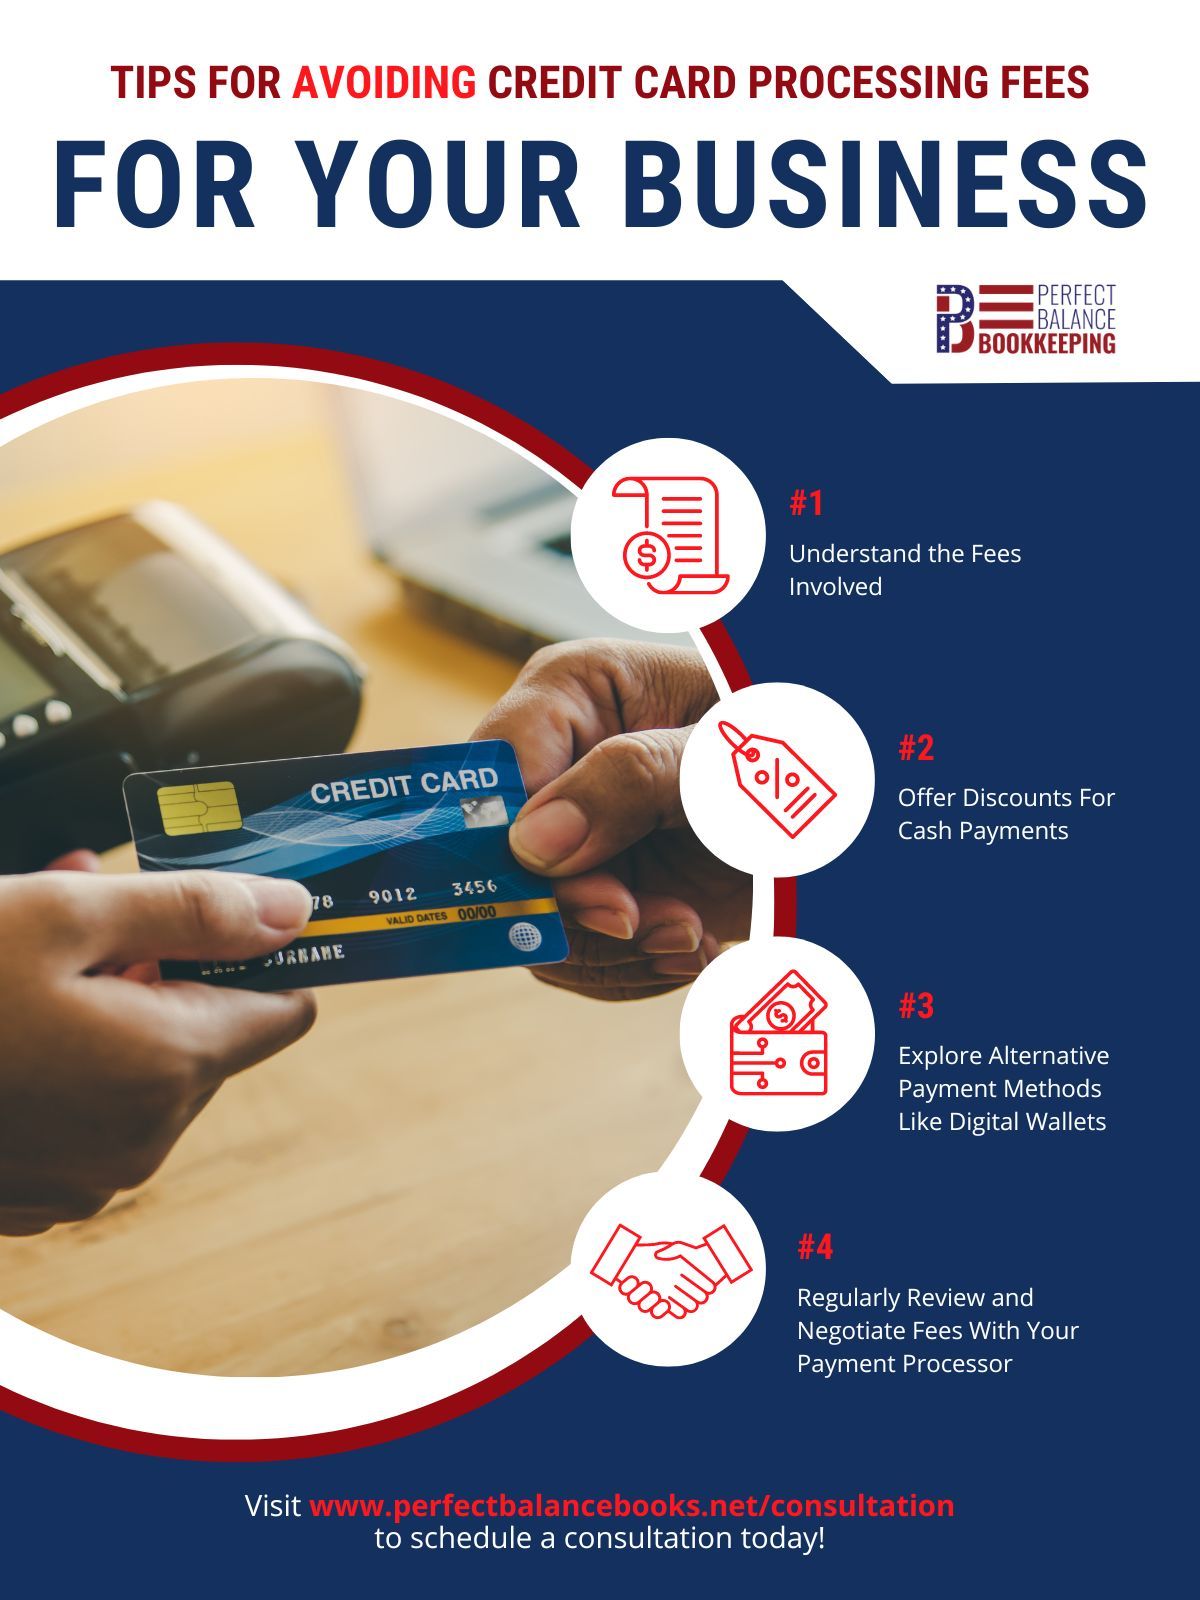 M26161 - May 2023 - Tips For Avoiding Credit Card processing Fees For Your Business.jpg